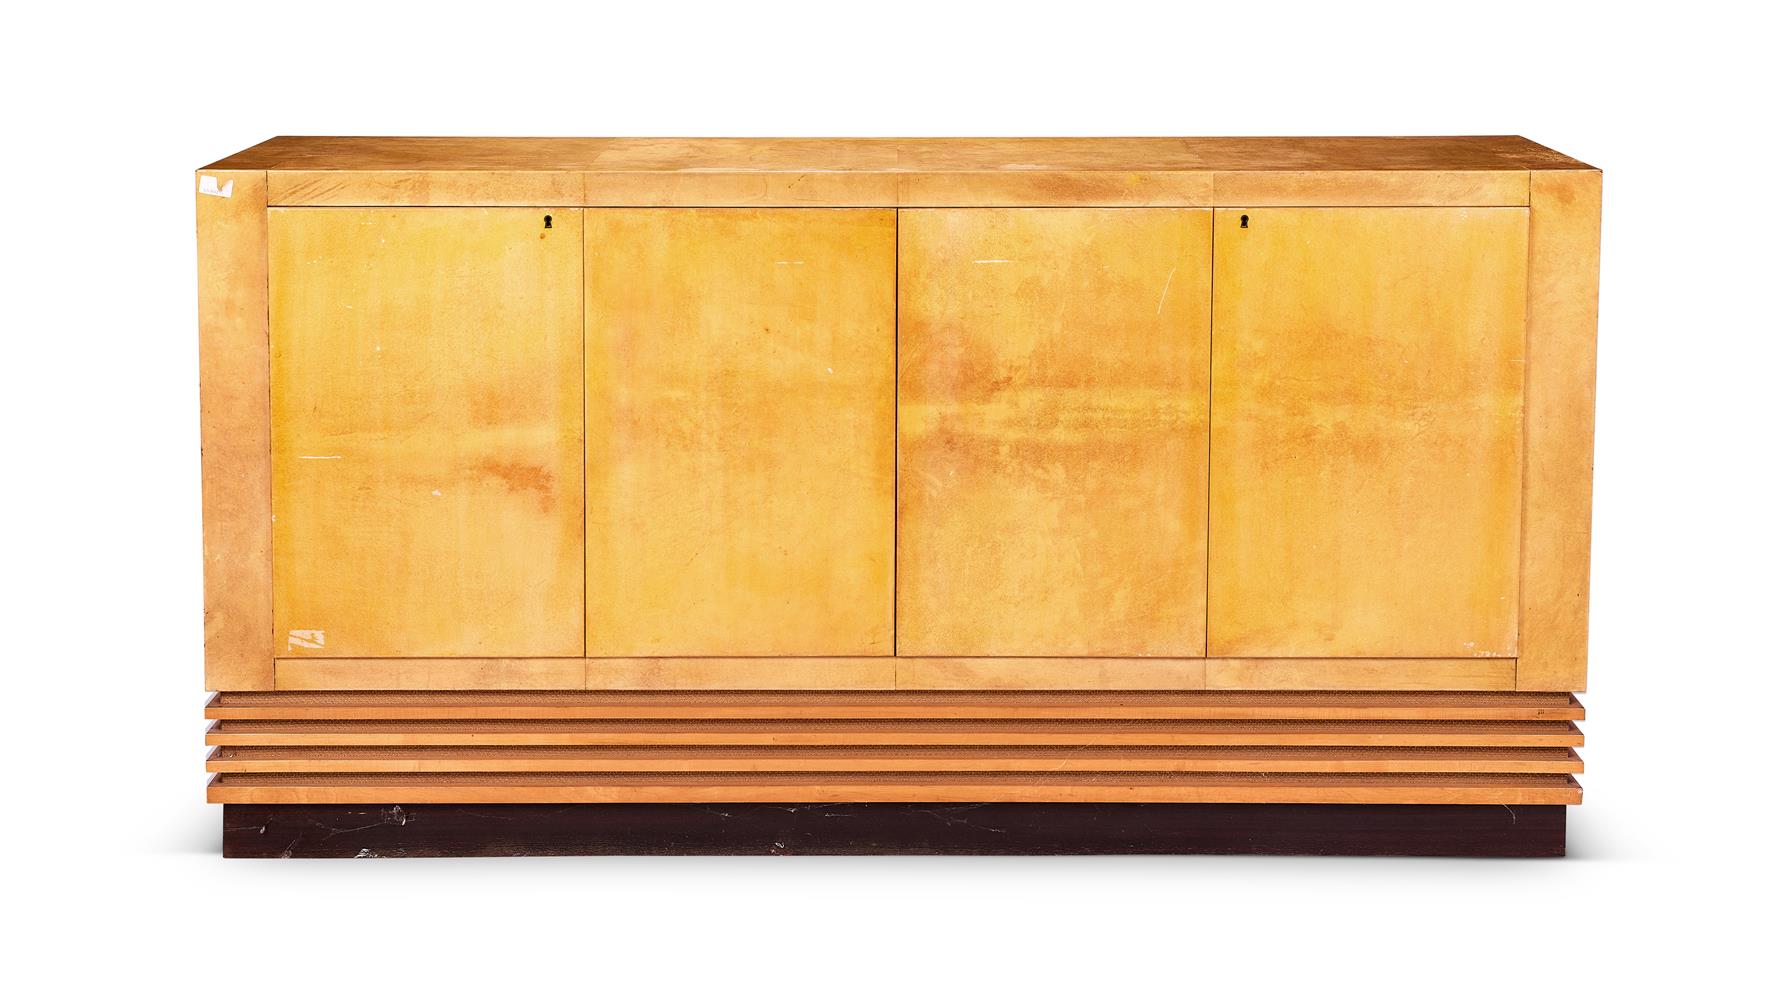 A LACQUERED GOATSKIN SIDE OR MUSIC CABINET BY ALDO TURA, CIRCA 1955 - Image 2 of 3